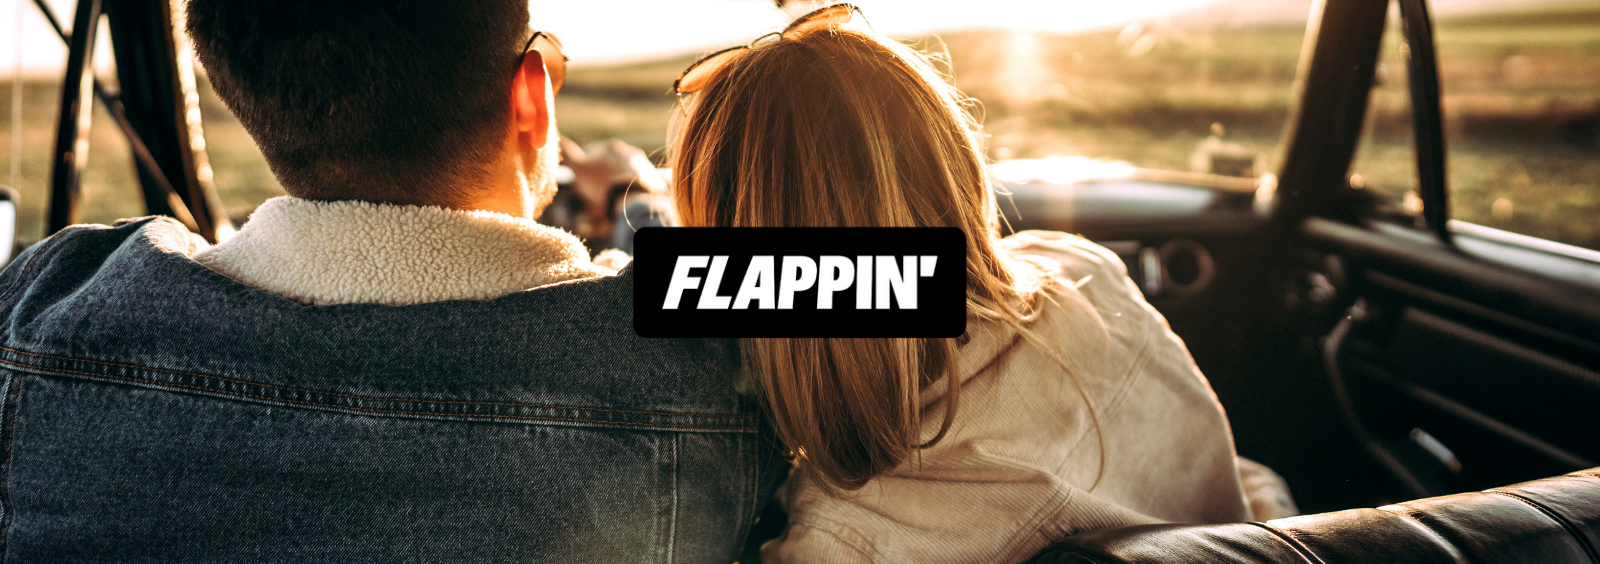 FLAPPIN' - 